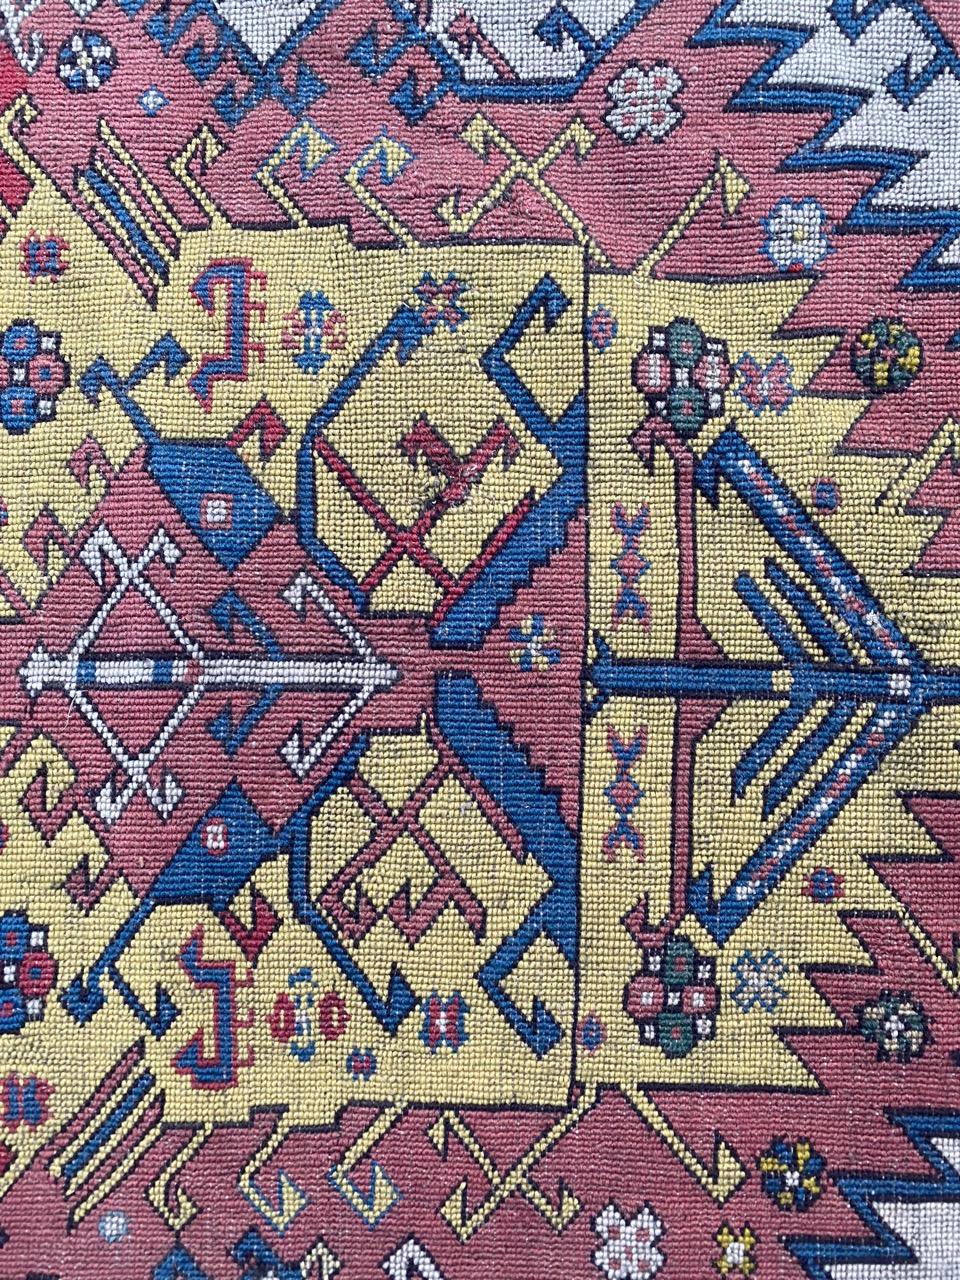 Bobyrug’s Extraordinary Unusual Antique Caucasian Needlepoint Embroidered Rug In Fair Condition For Sale In Saint Ouen, FR